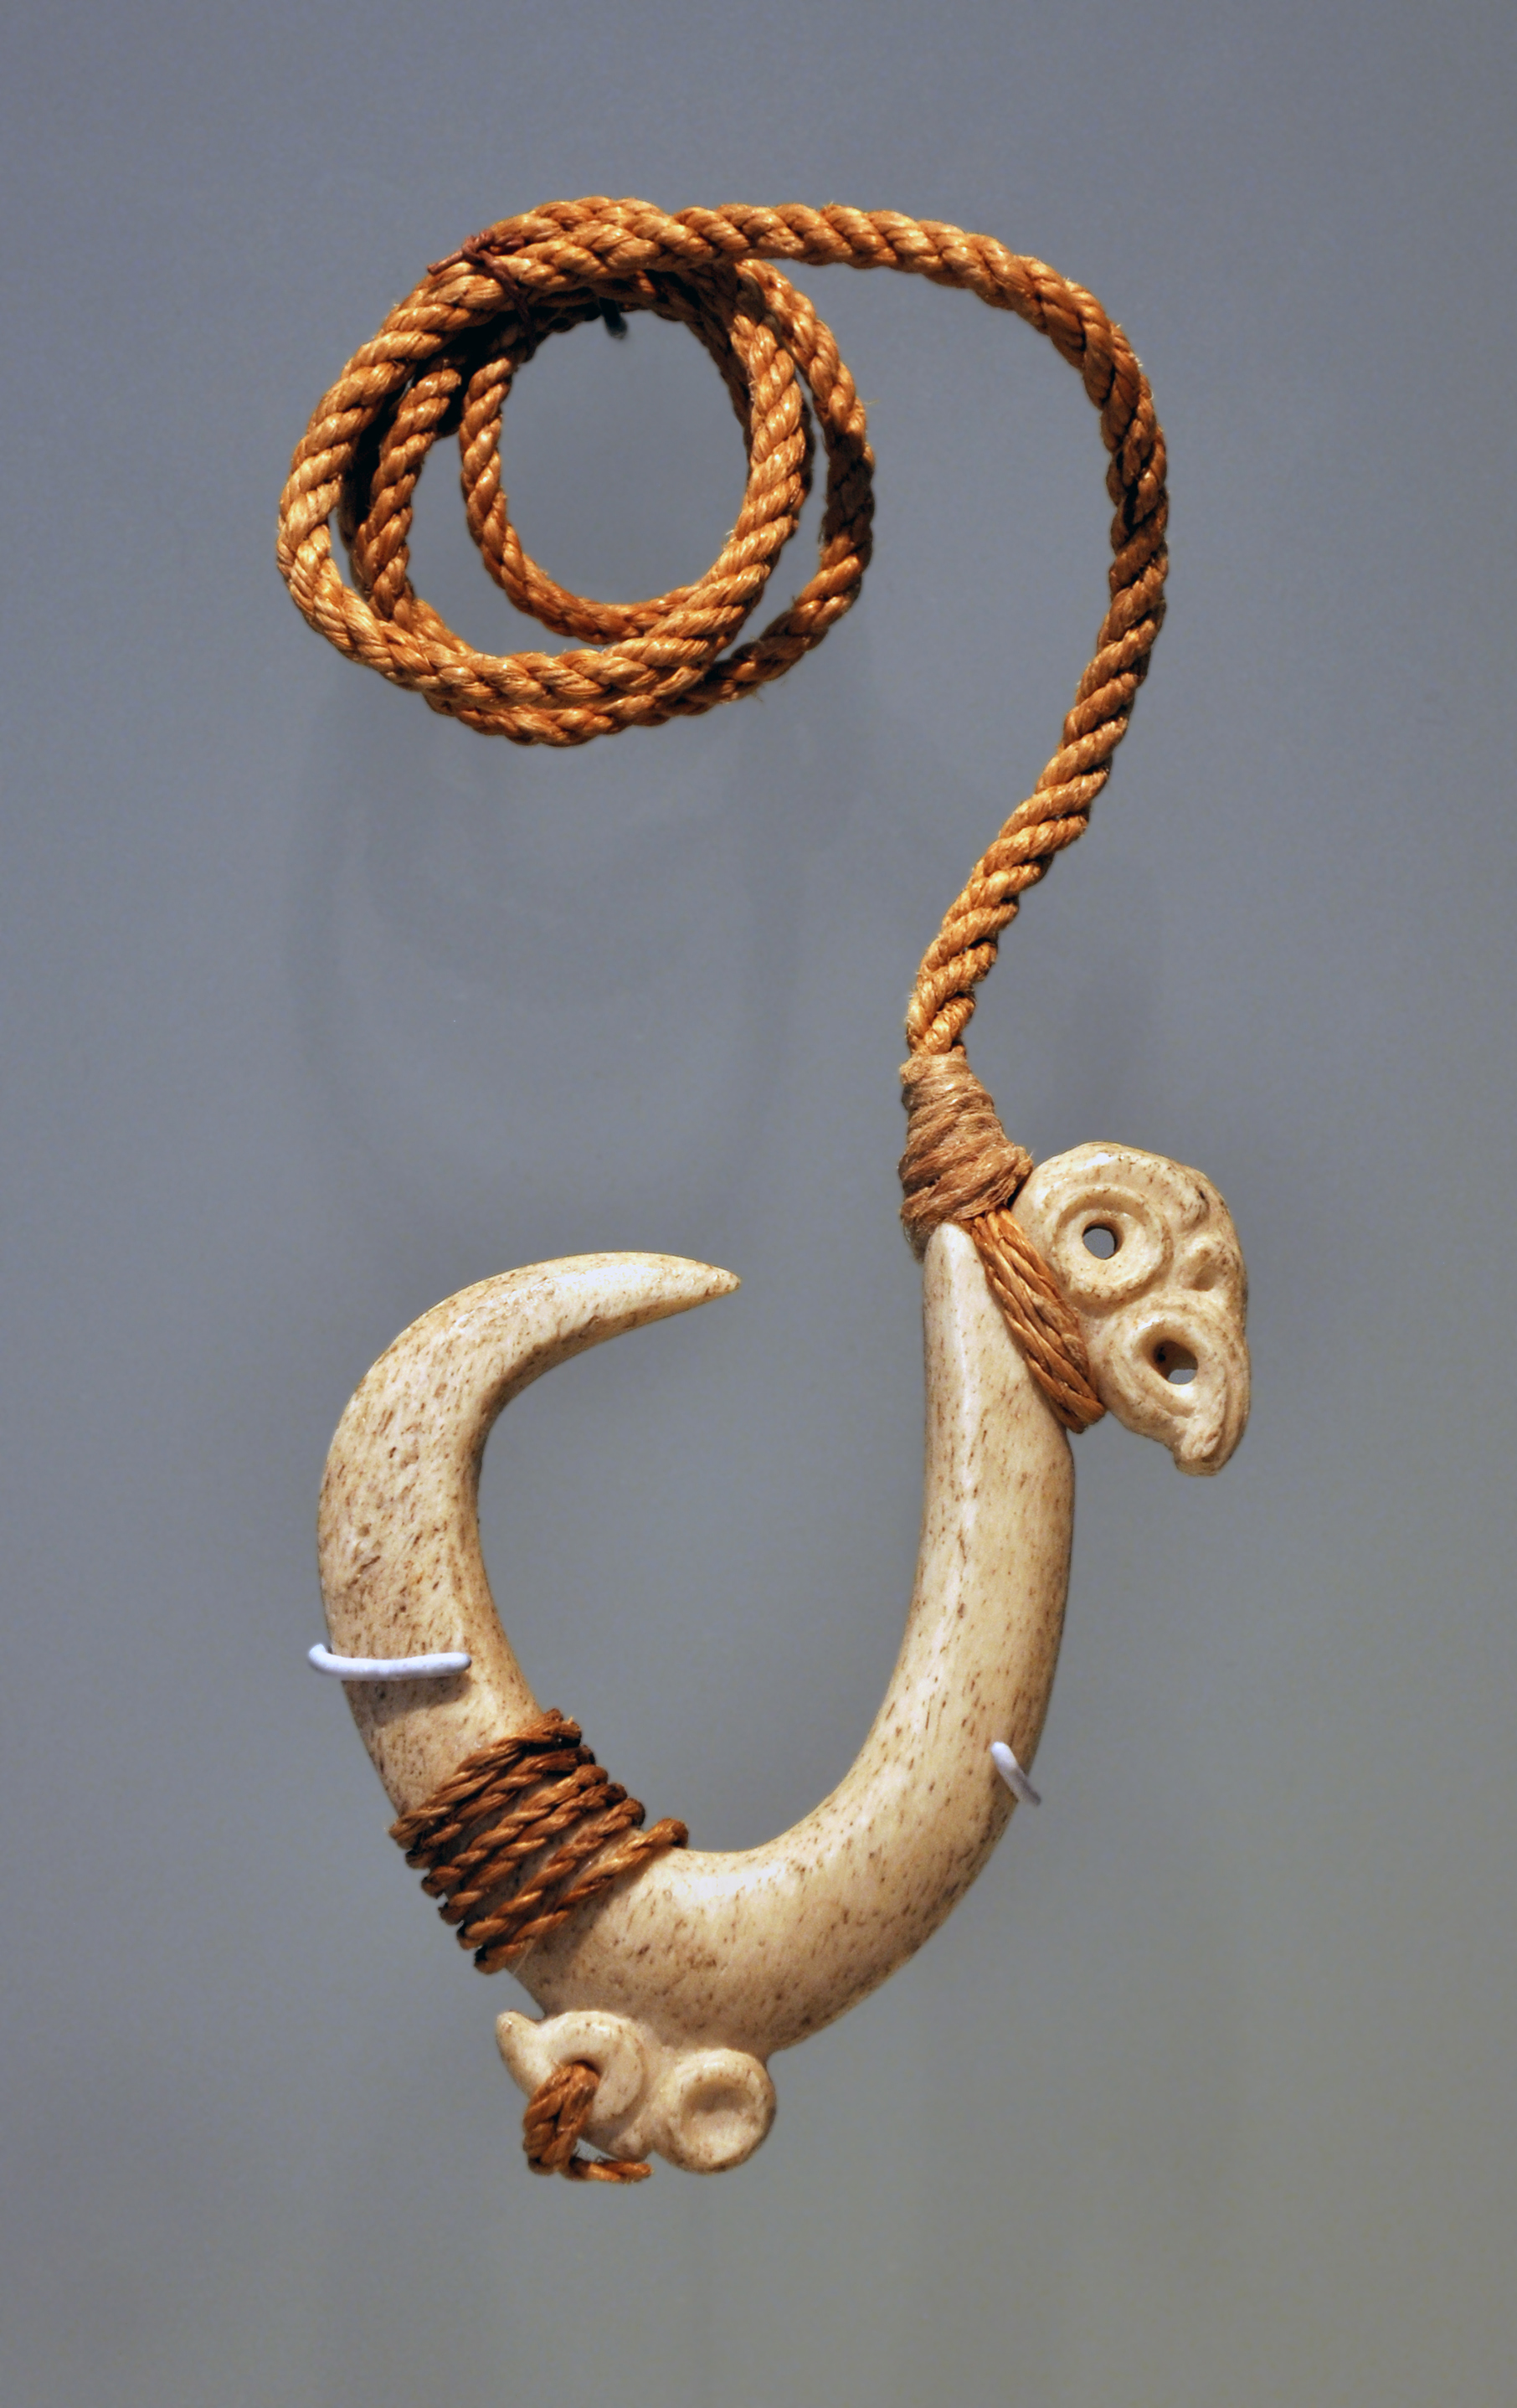 Fishing hook, bone, Maori culture, 1800-1900. In the exhibition "Maori, their treasures have got a soul", in the Musée des Arts Premiers in Paris, from the end of 2011 to the begining of 2012.